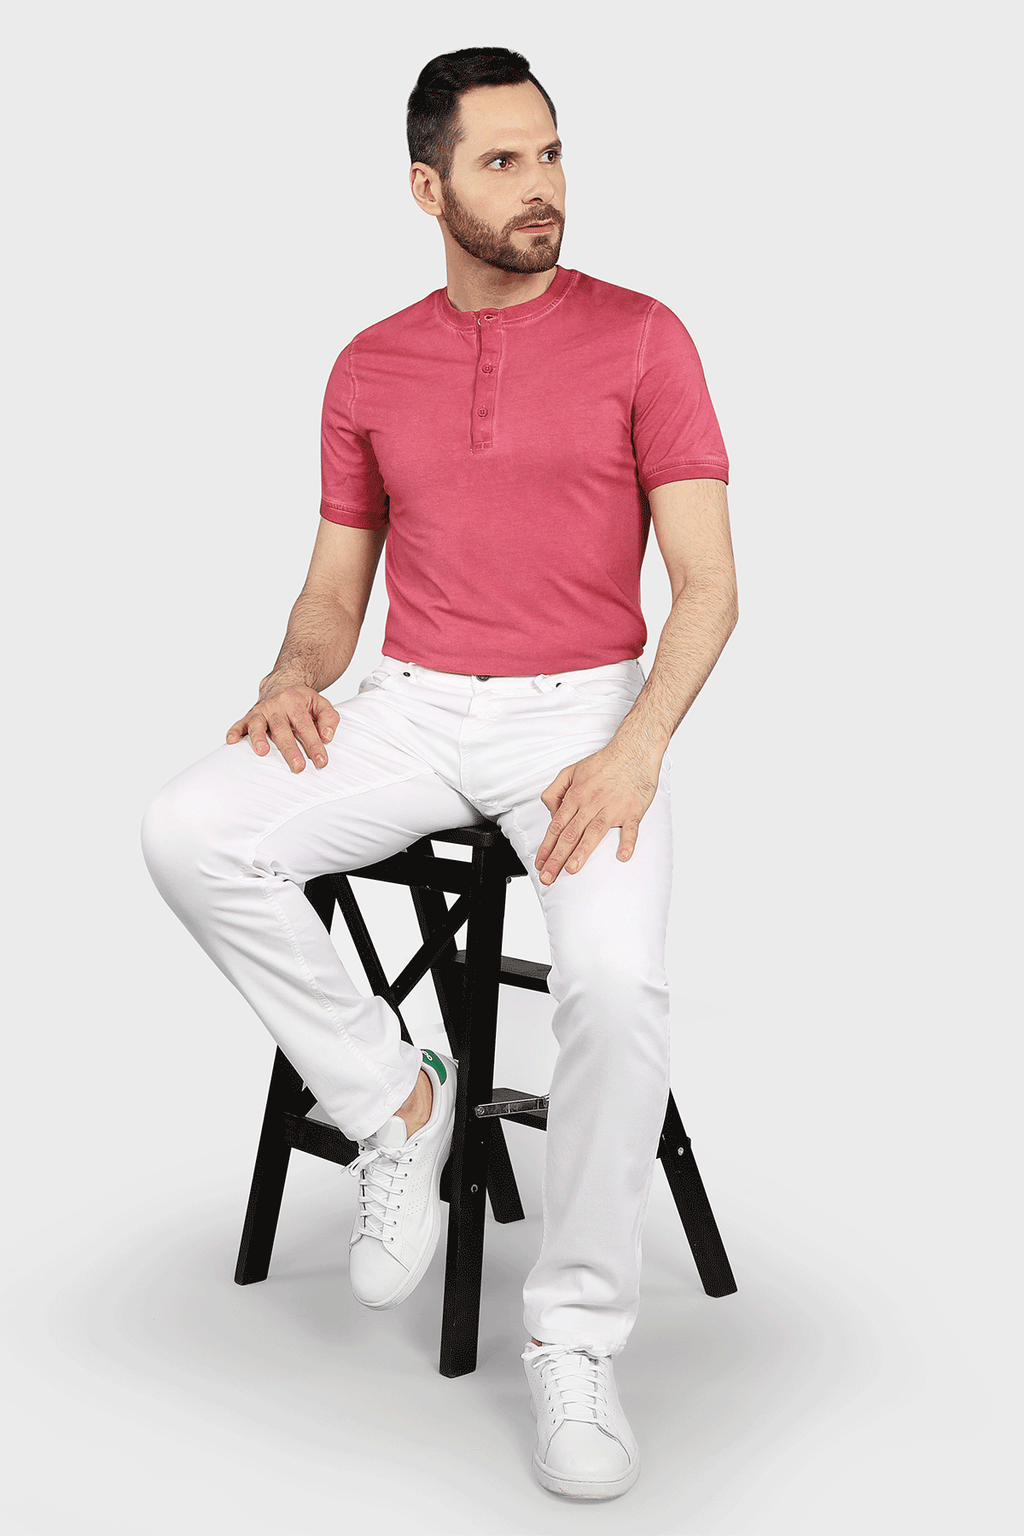 Five Pocket Stretch Pants in White - 7 Downie St.®